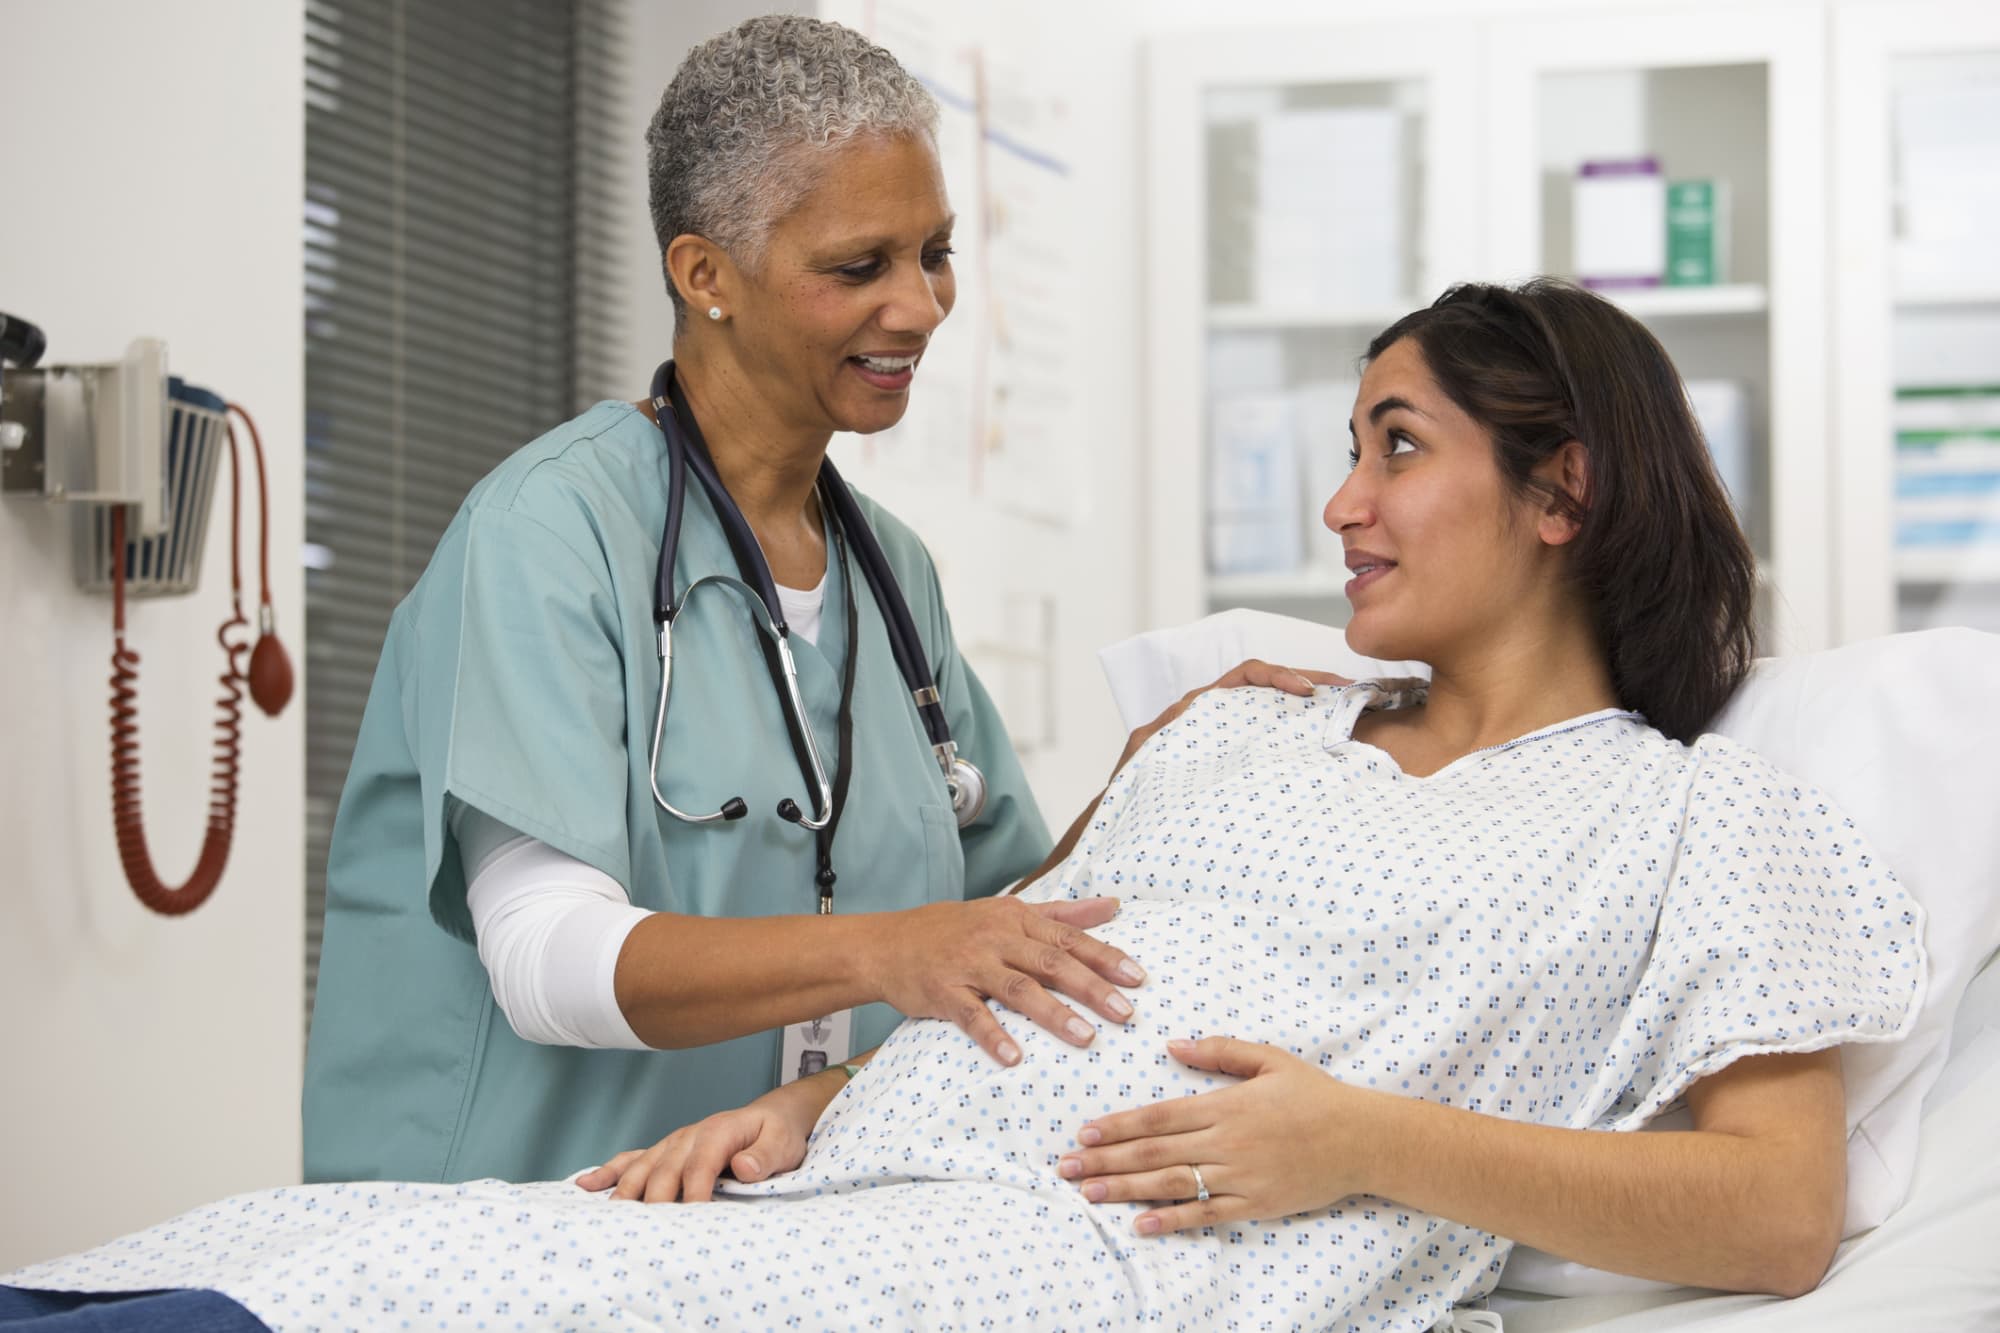 How to Become a Labor and Delivery Nurse